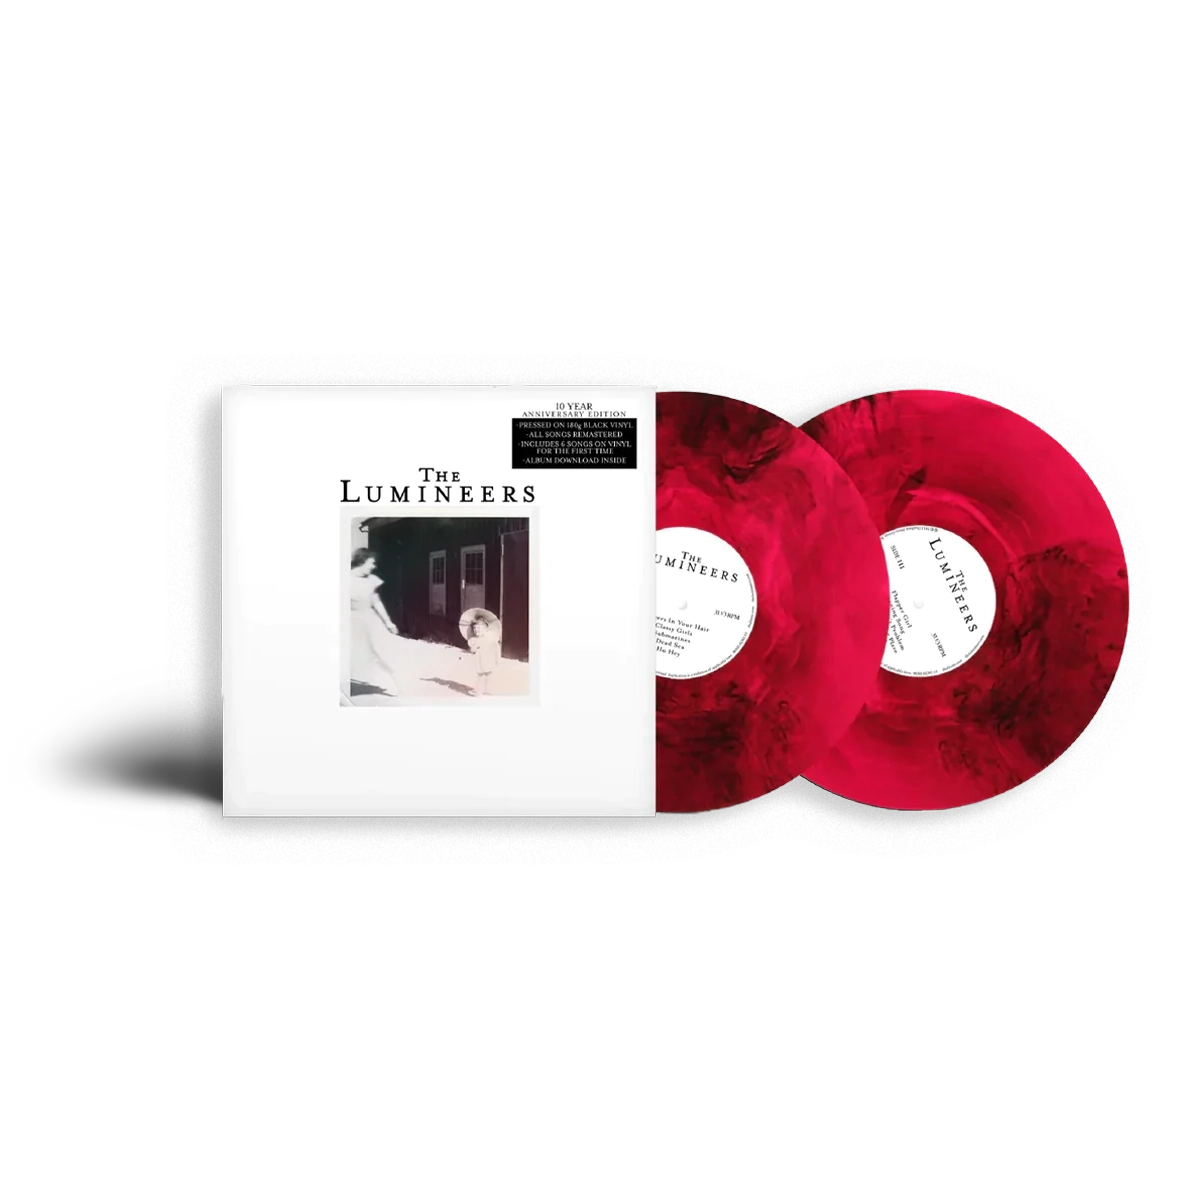 The Lumineers - The Lumineers (10th Anniversary Edition): Red Marble Vinyl 2LP